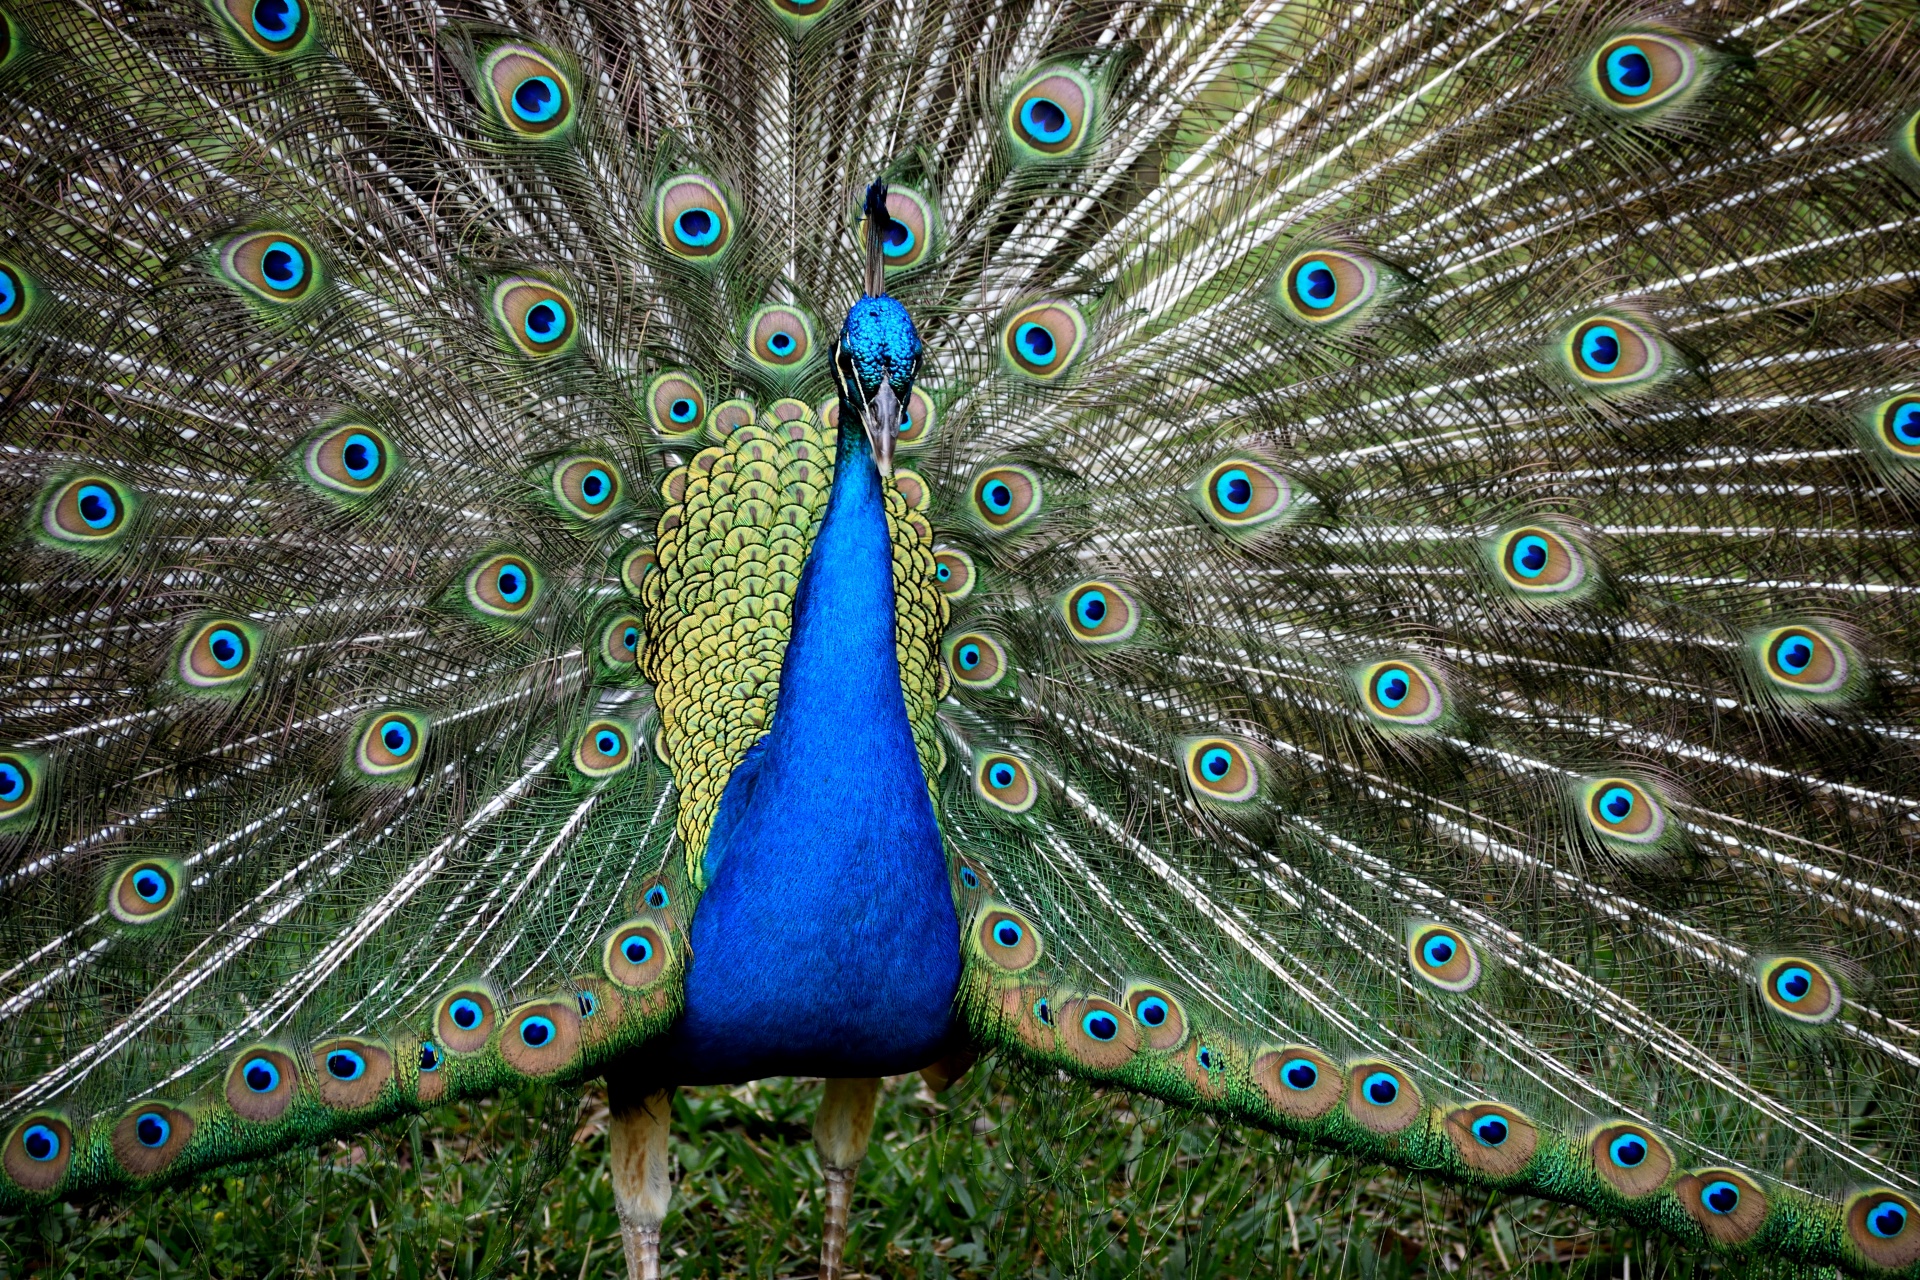 photo of a peacock with tail feathers spread